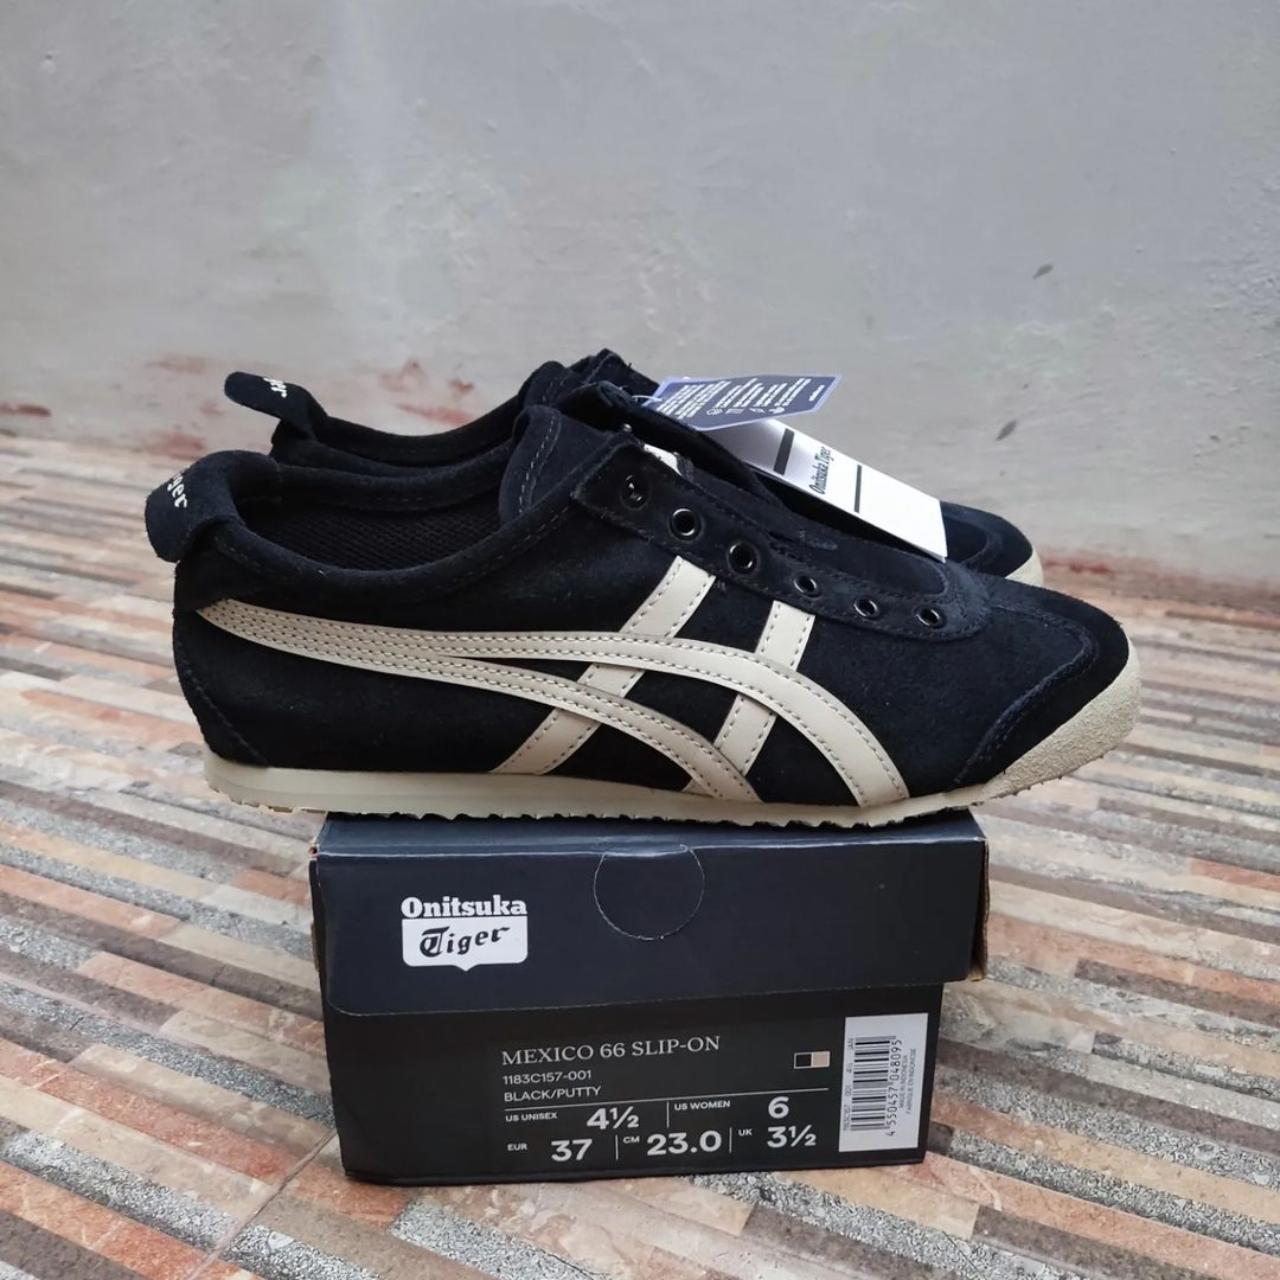 Onitsuka Tiger Mexico 66 Slip-On in Fine Suede Details